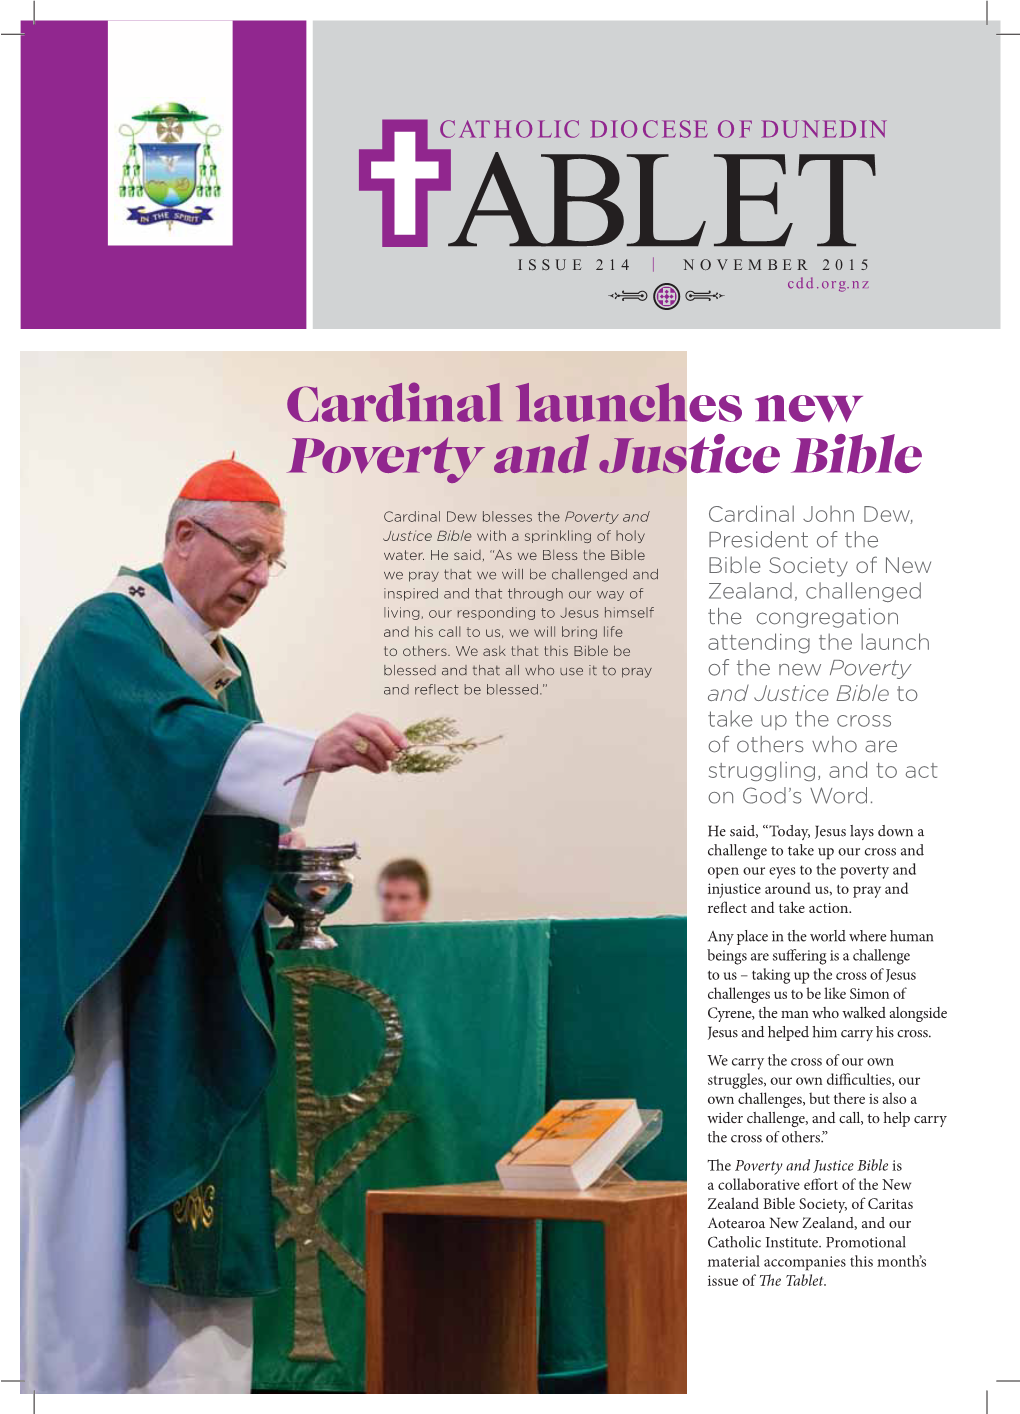 Cardinal Launches New Poverty and Justice Bible